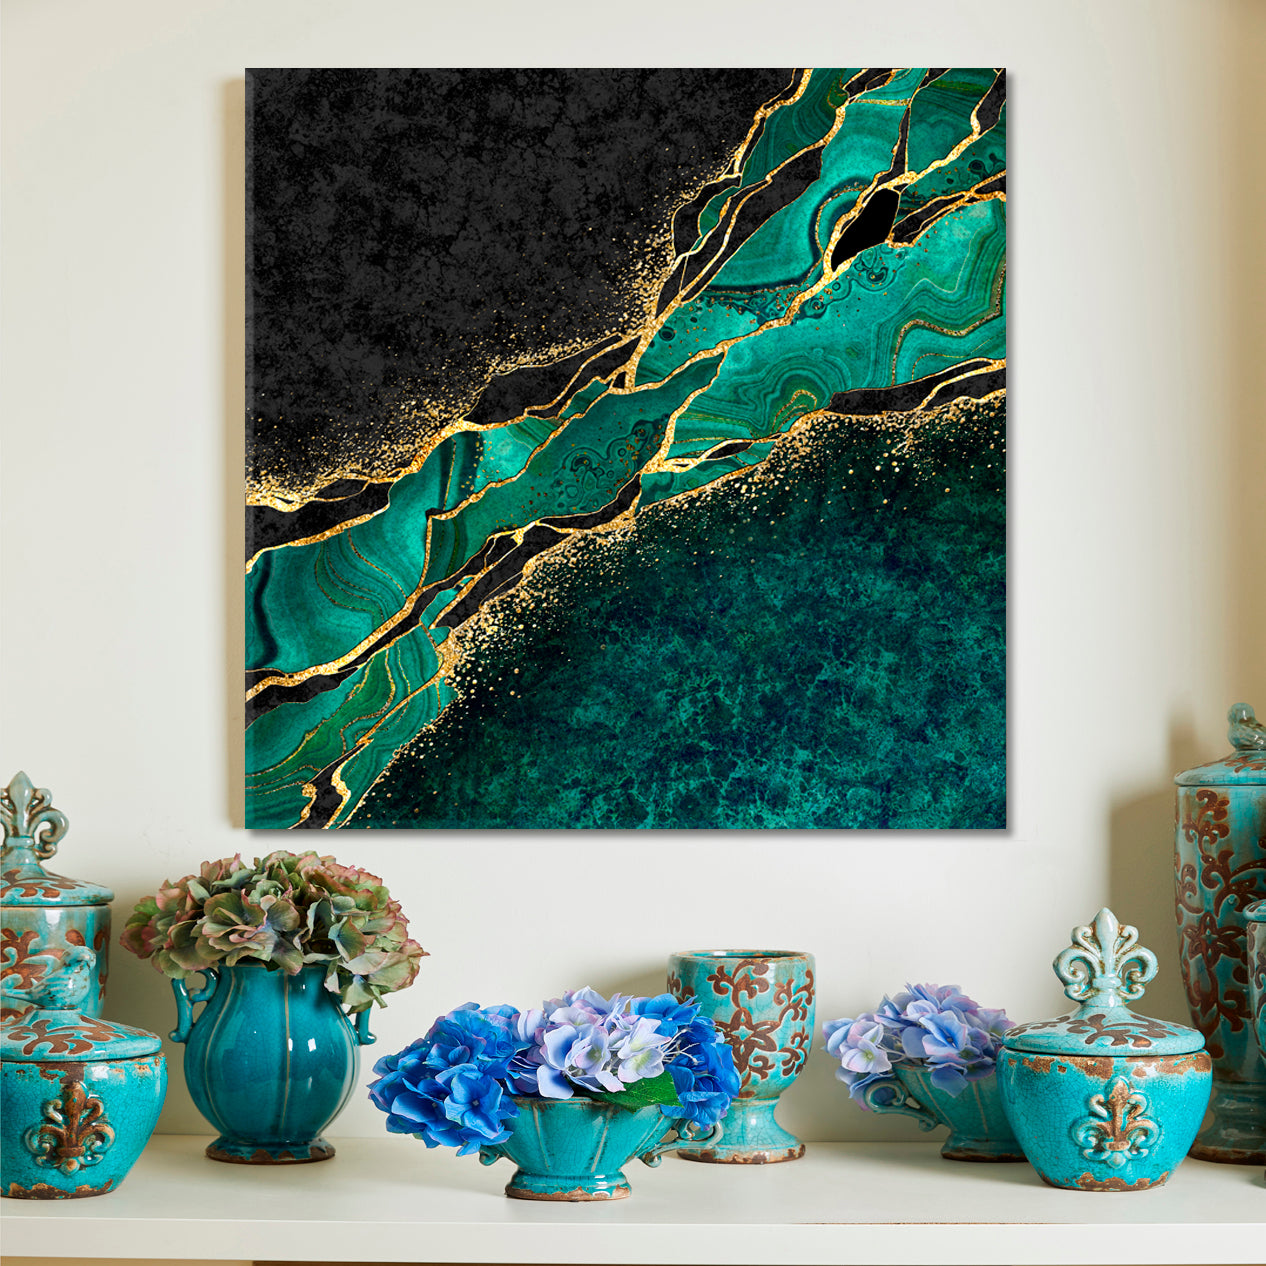 MALACHITE Japanese Kintsugi Technique Abstract Green Black Marble with Gold Veins Stone Canvas Print - Square Fluid Art, Oriental Marbling Canvas Print Artesty 1 Panel 12"x12" 